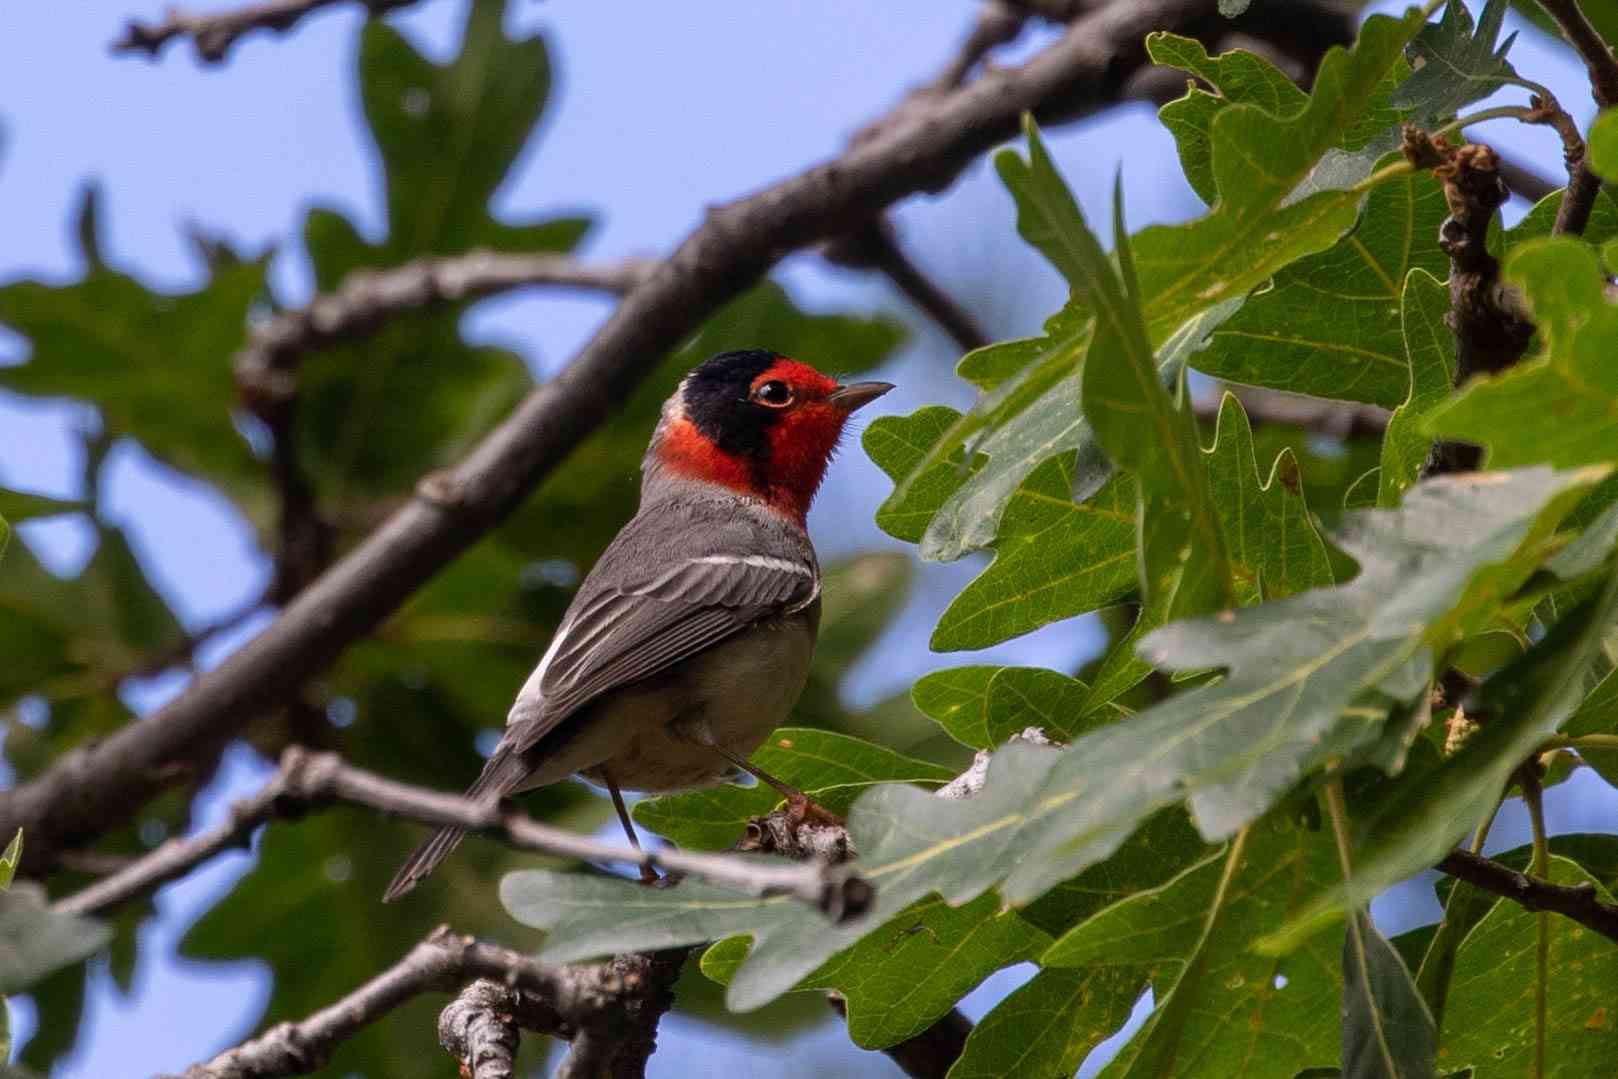 2019.08.07 - Red-Faced Warbler in Tree - Arizona - Shawn Taylor